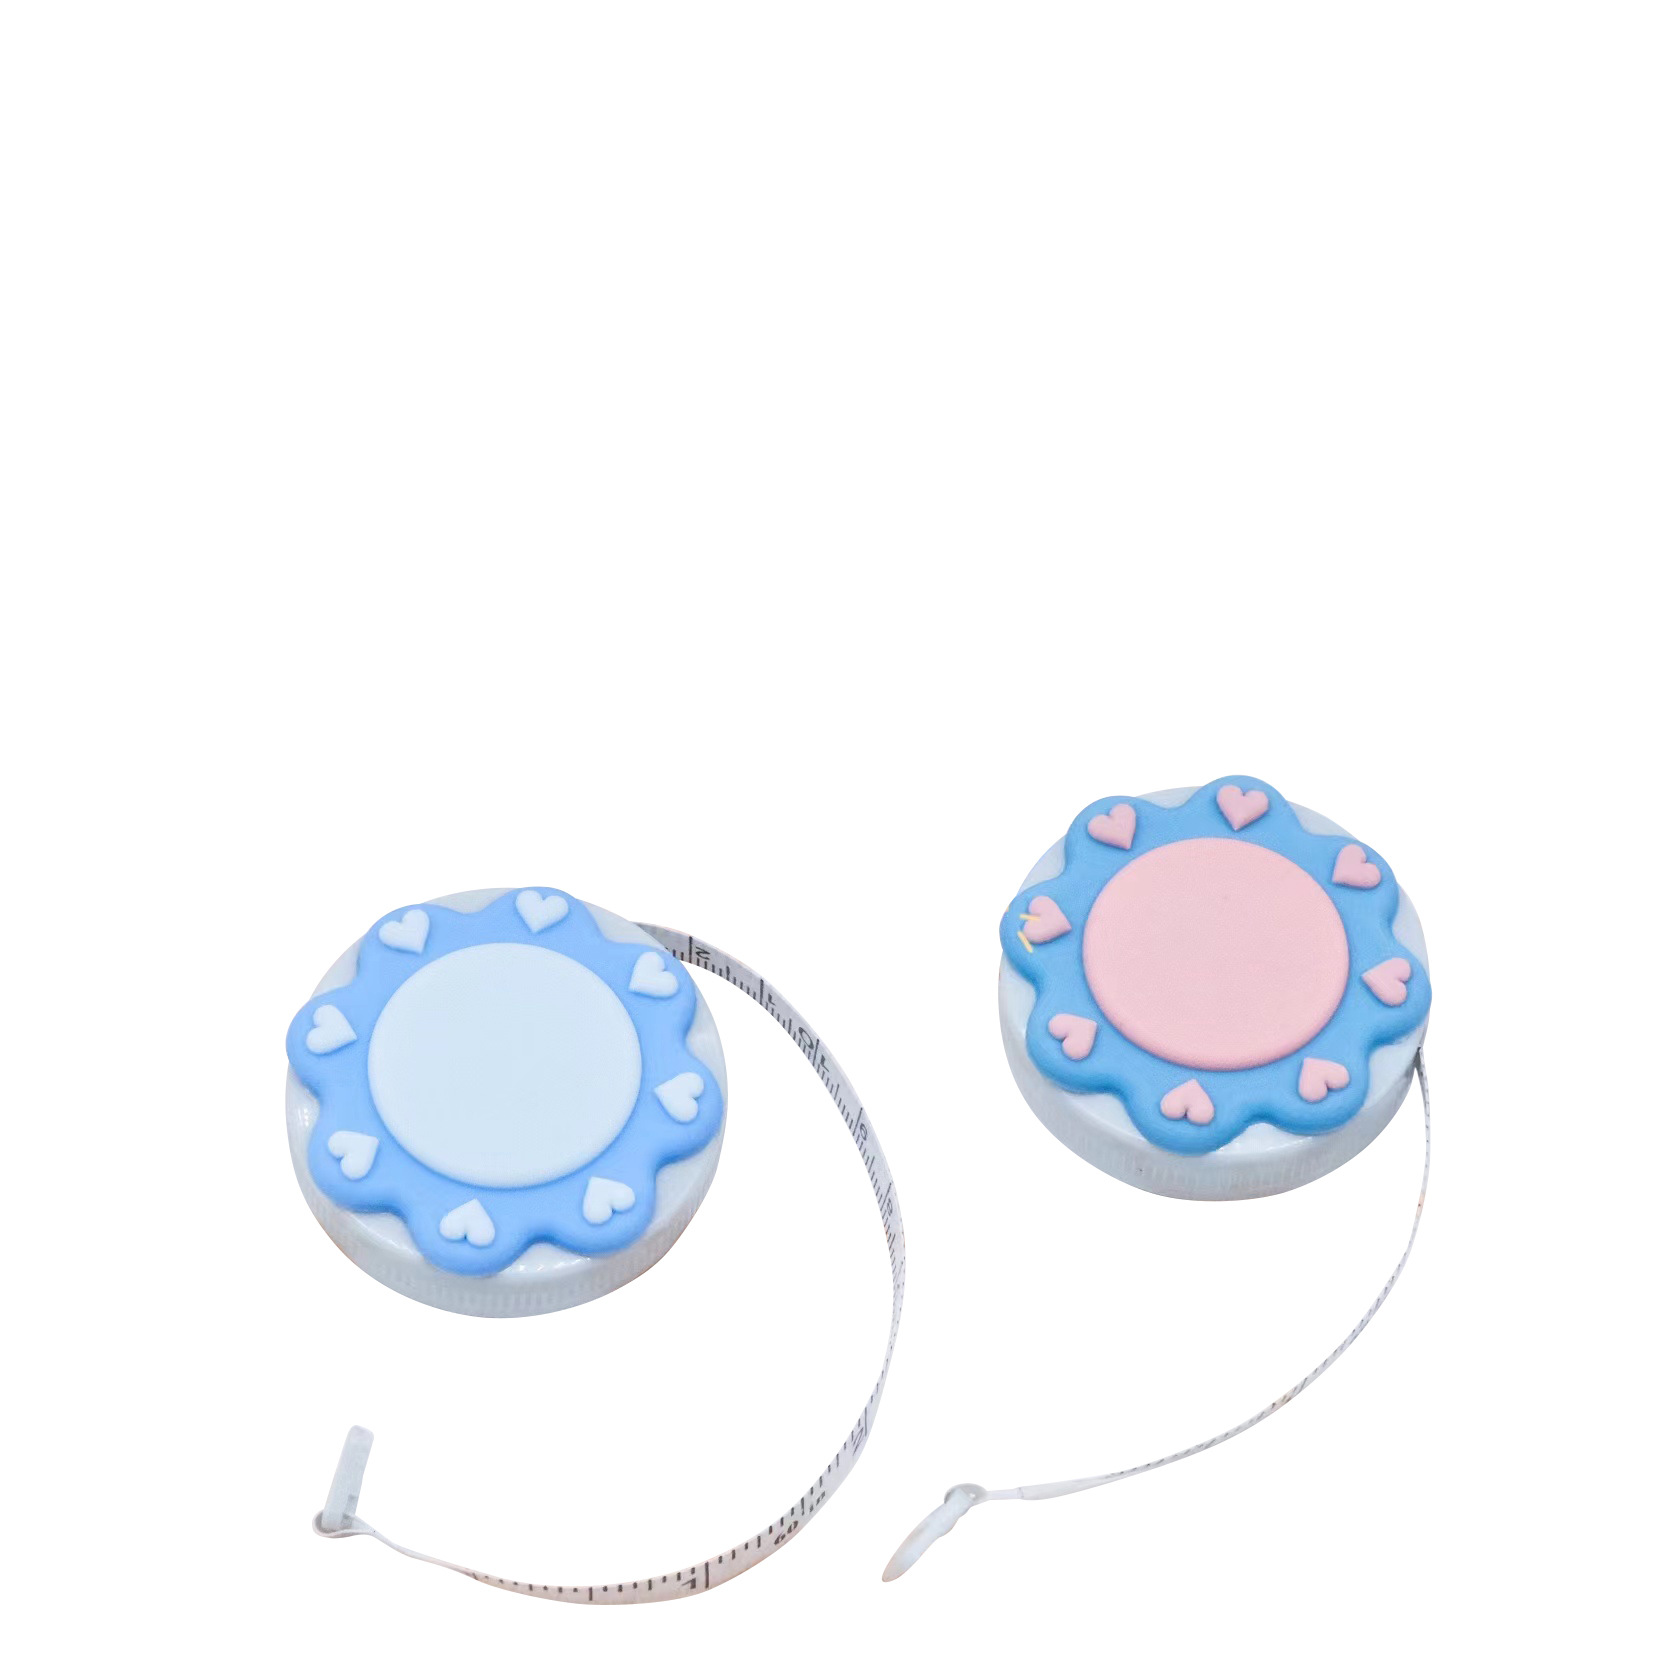 Macaron Cute Mini Tape Measure Tape Measure Portable Meter Size Waist Three-way Portable Height Measuring Clothes Soft Small Ruler